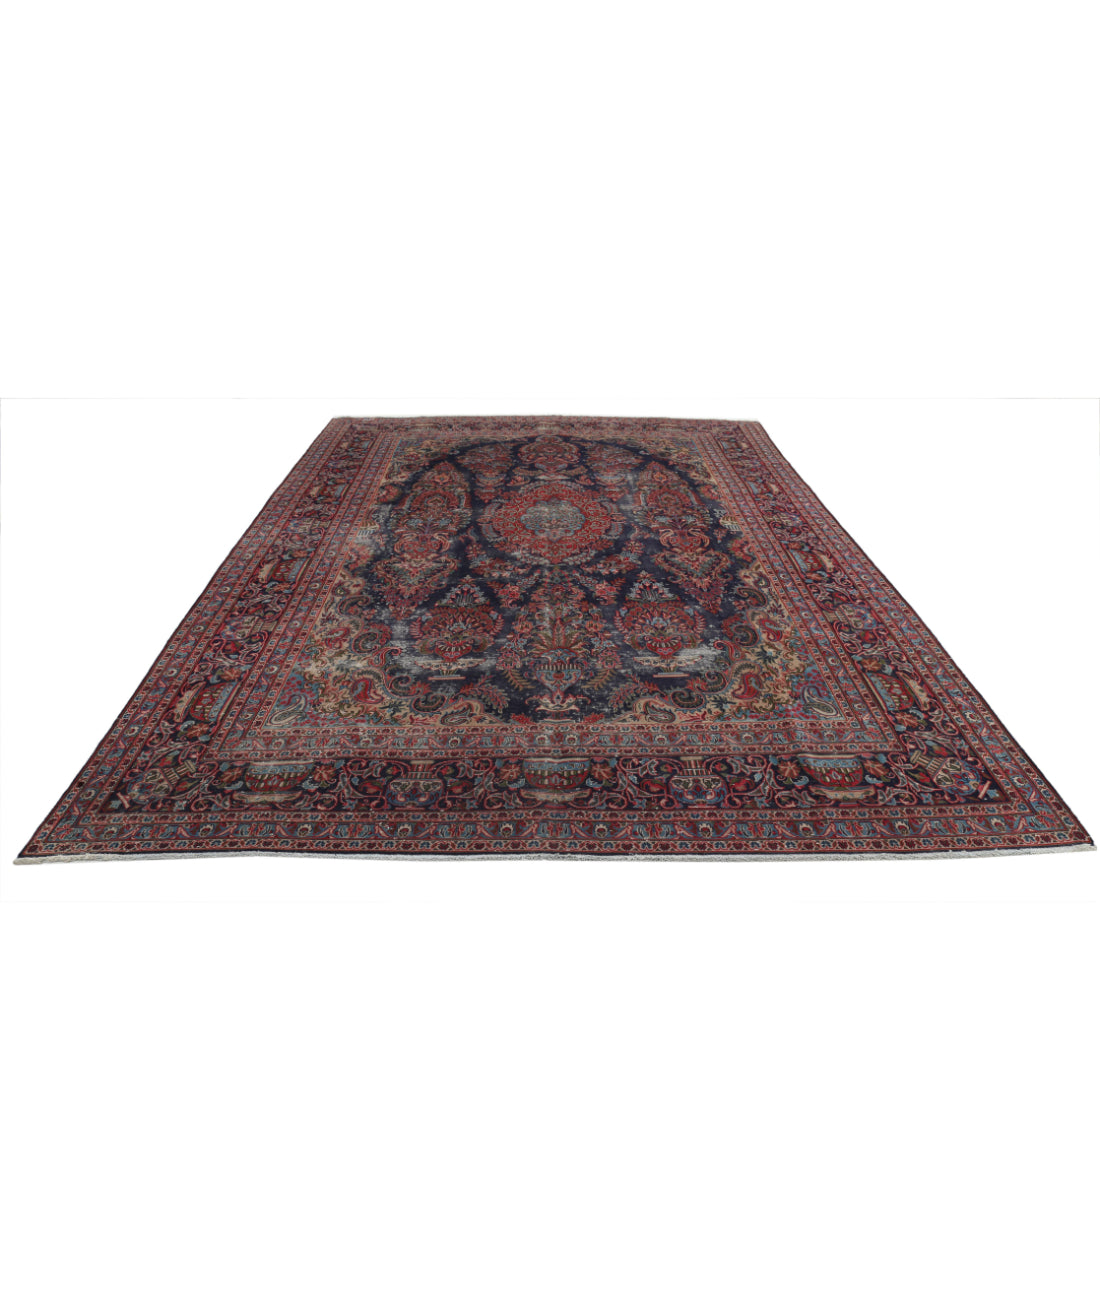 Hand Knotted Vintage Persian Tabriz Wool Rug - 9'6'' x 12'11'' 9'6'' x 12'11'' (285 X 388) / Blue / Red